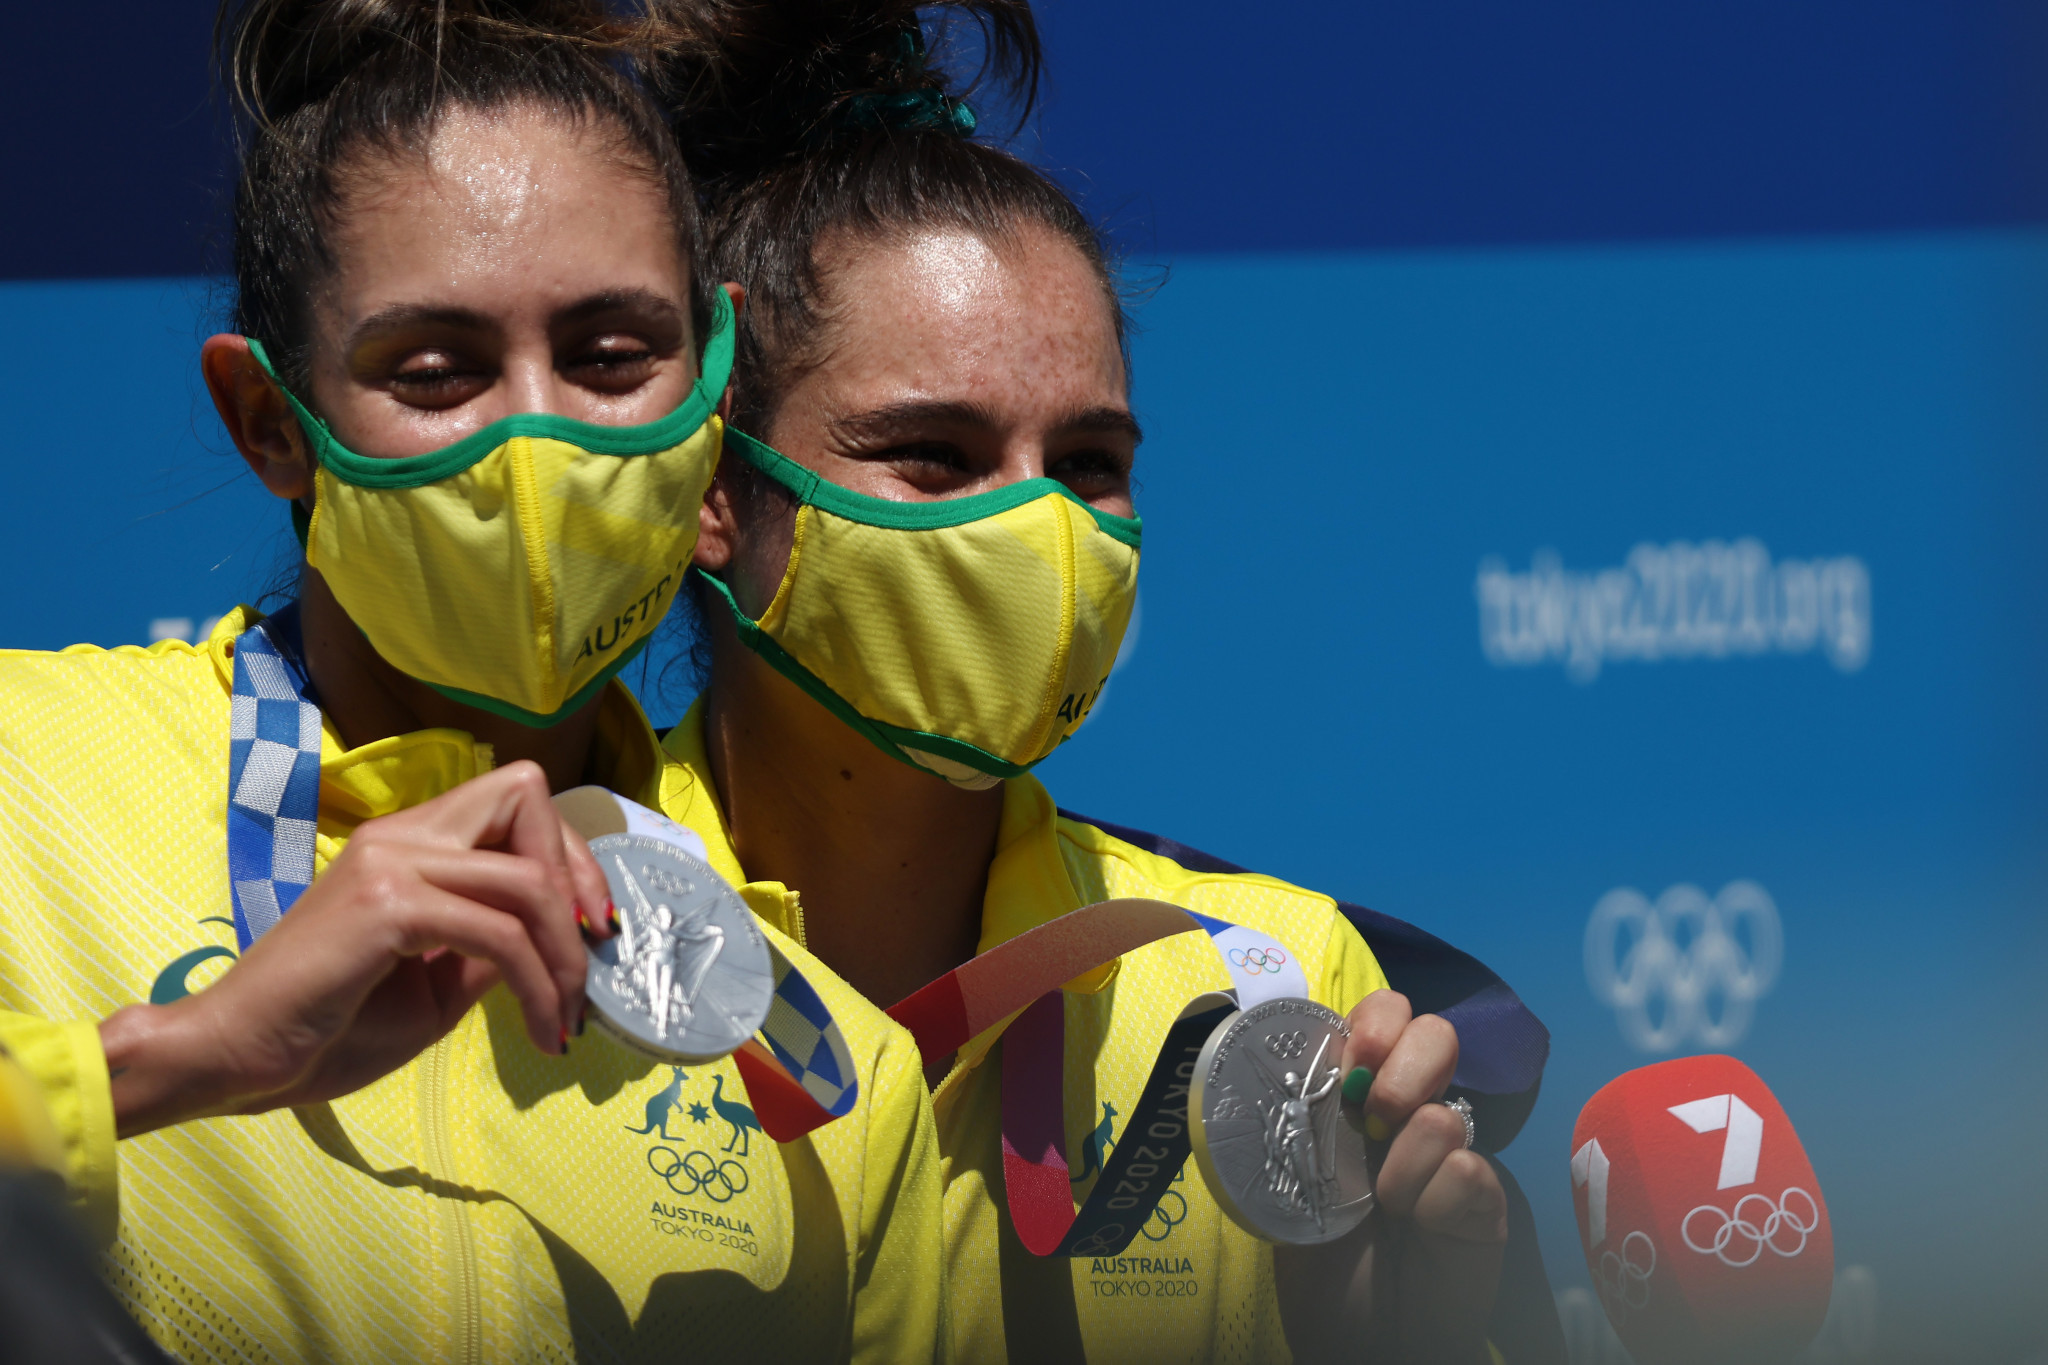 Taliqua Clancy and Mariafe Artacho del Solar won Olympic silver in the women's beach volleyball tournament ©Getty Images